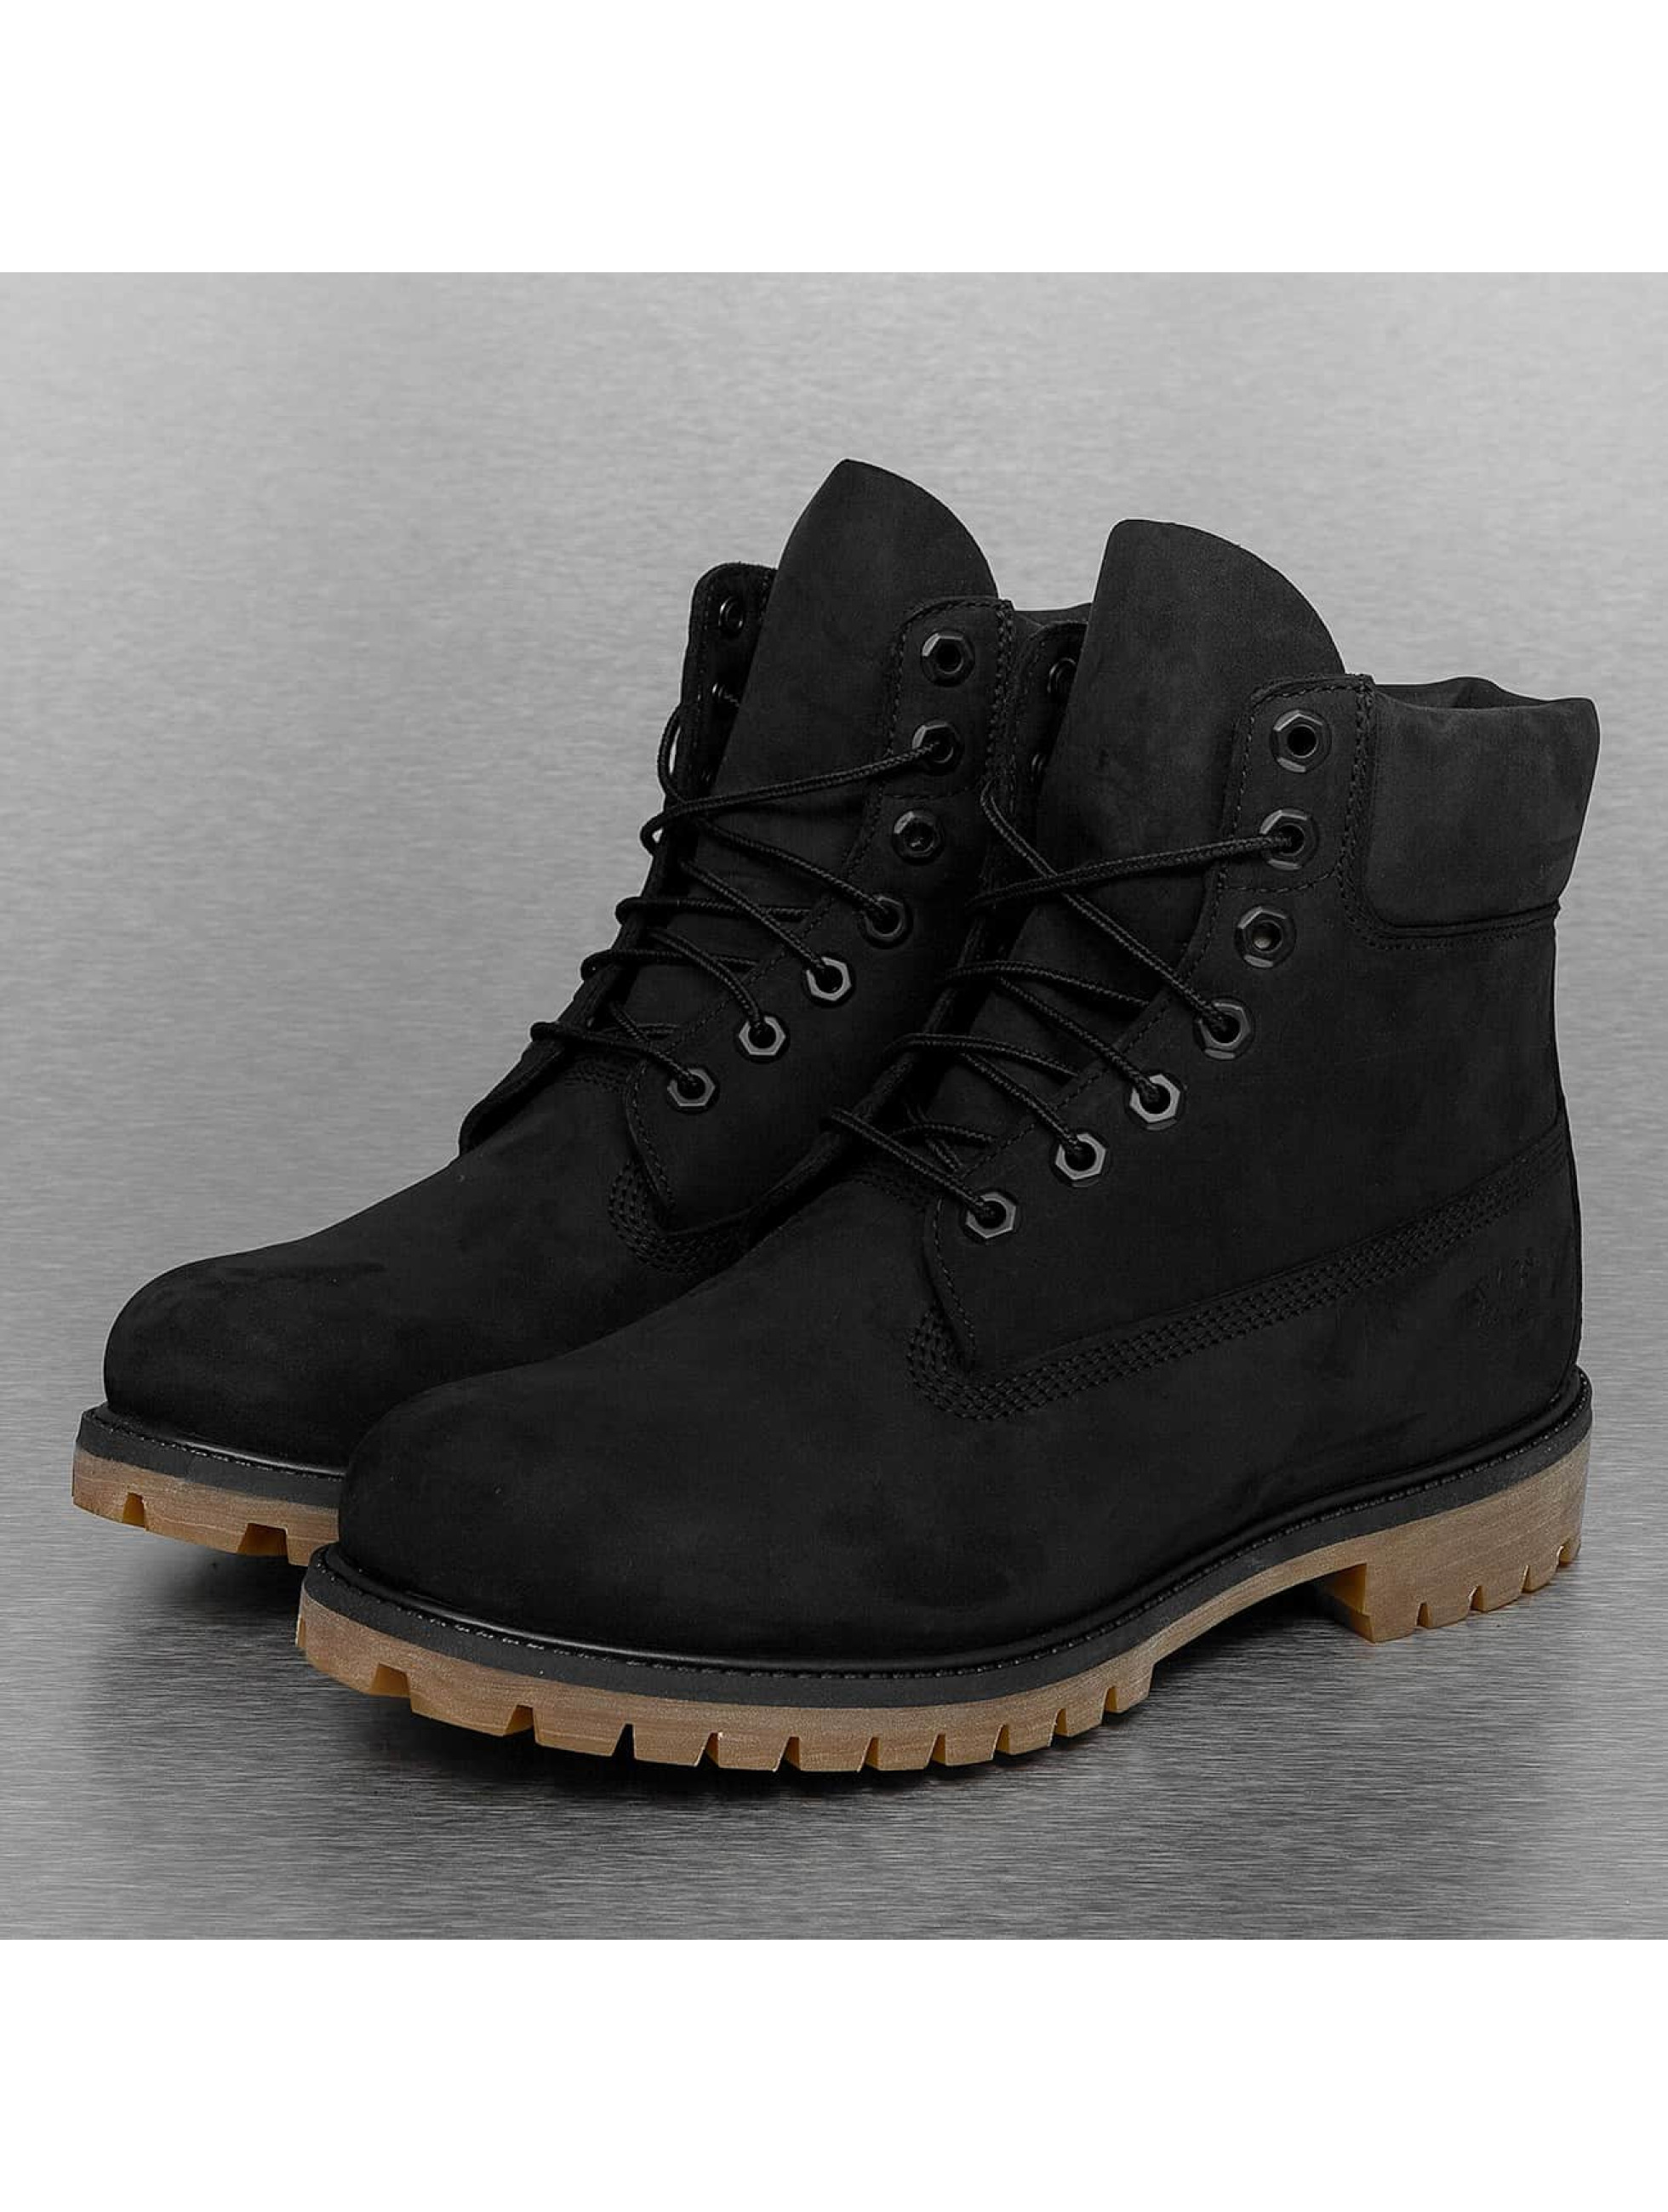 Timberland Icon 6 In Premium noir Chaussures montantes homme